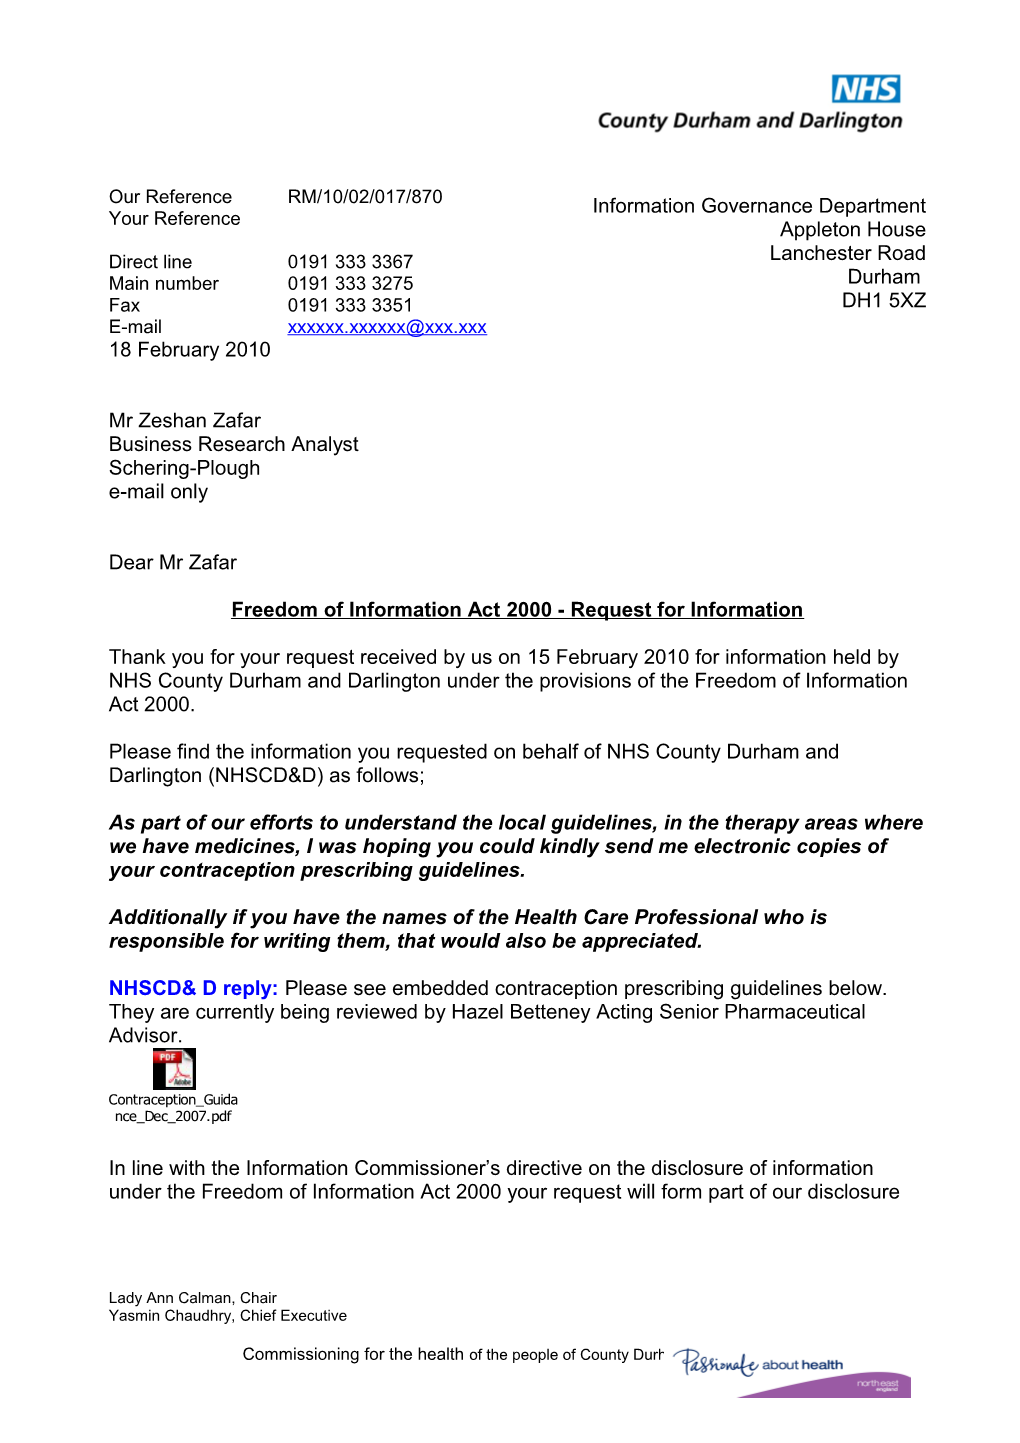 Freedom of Information Act 2000 - Request for Information s1